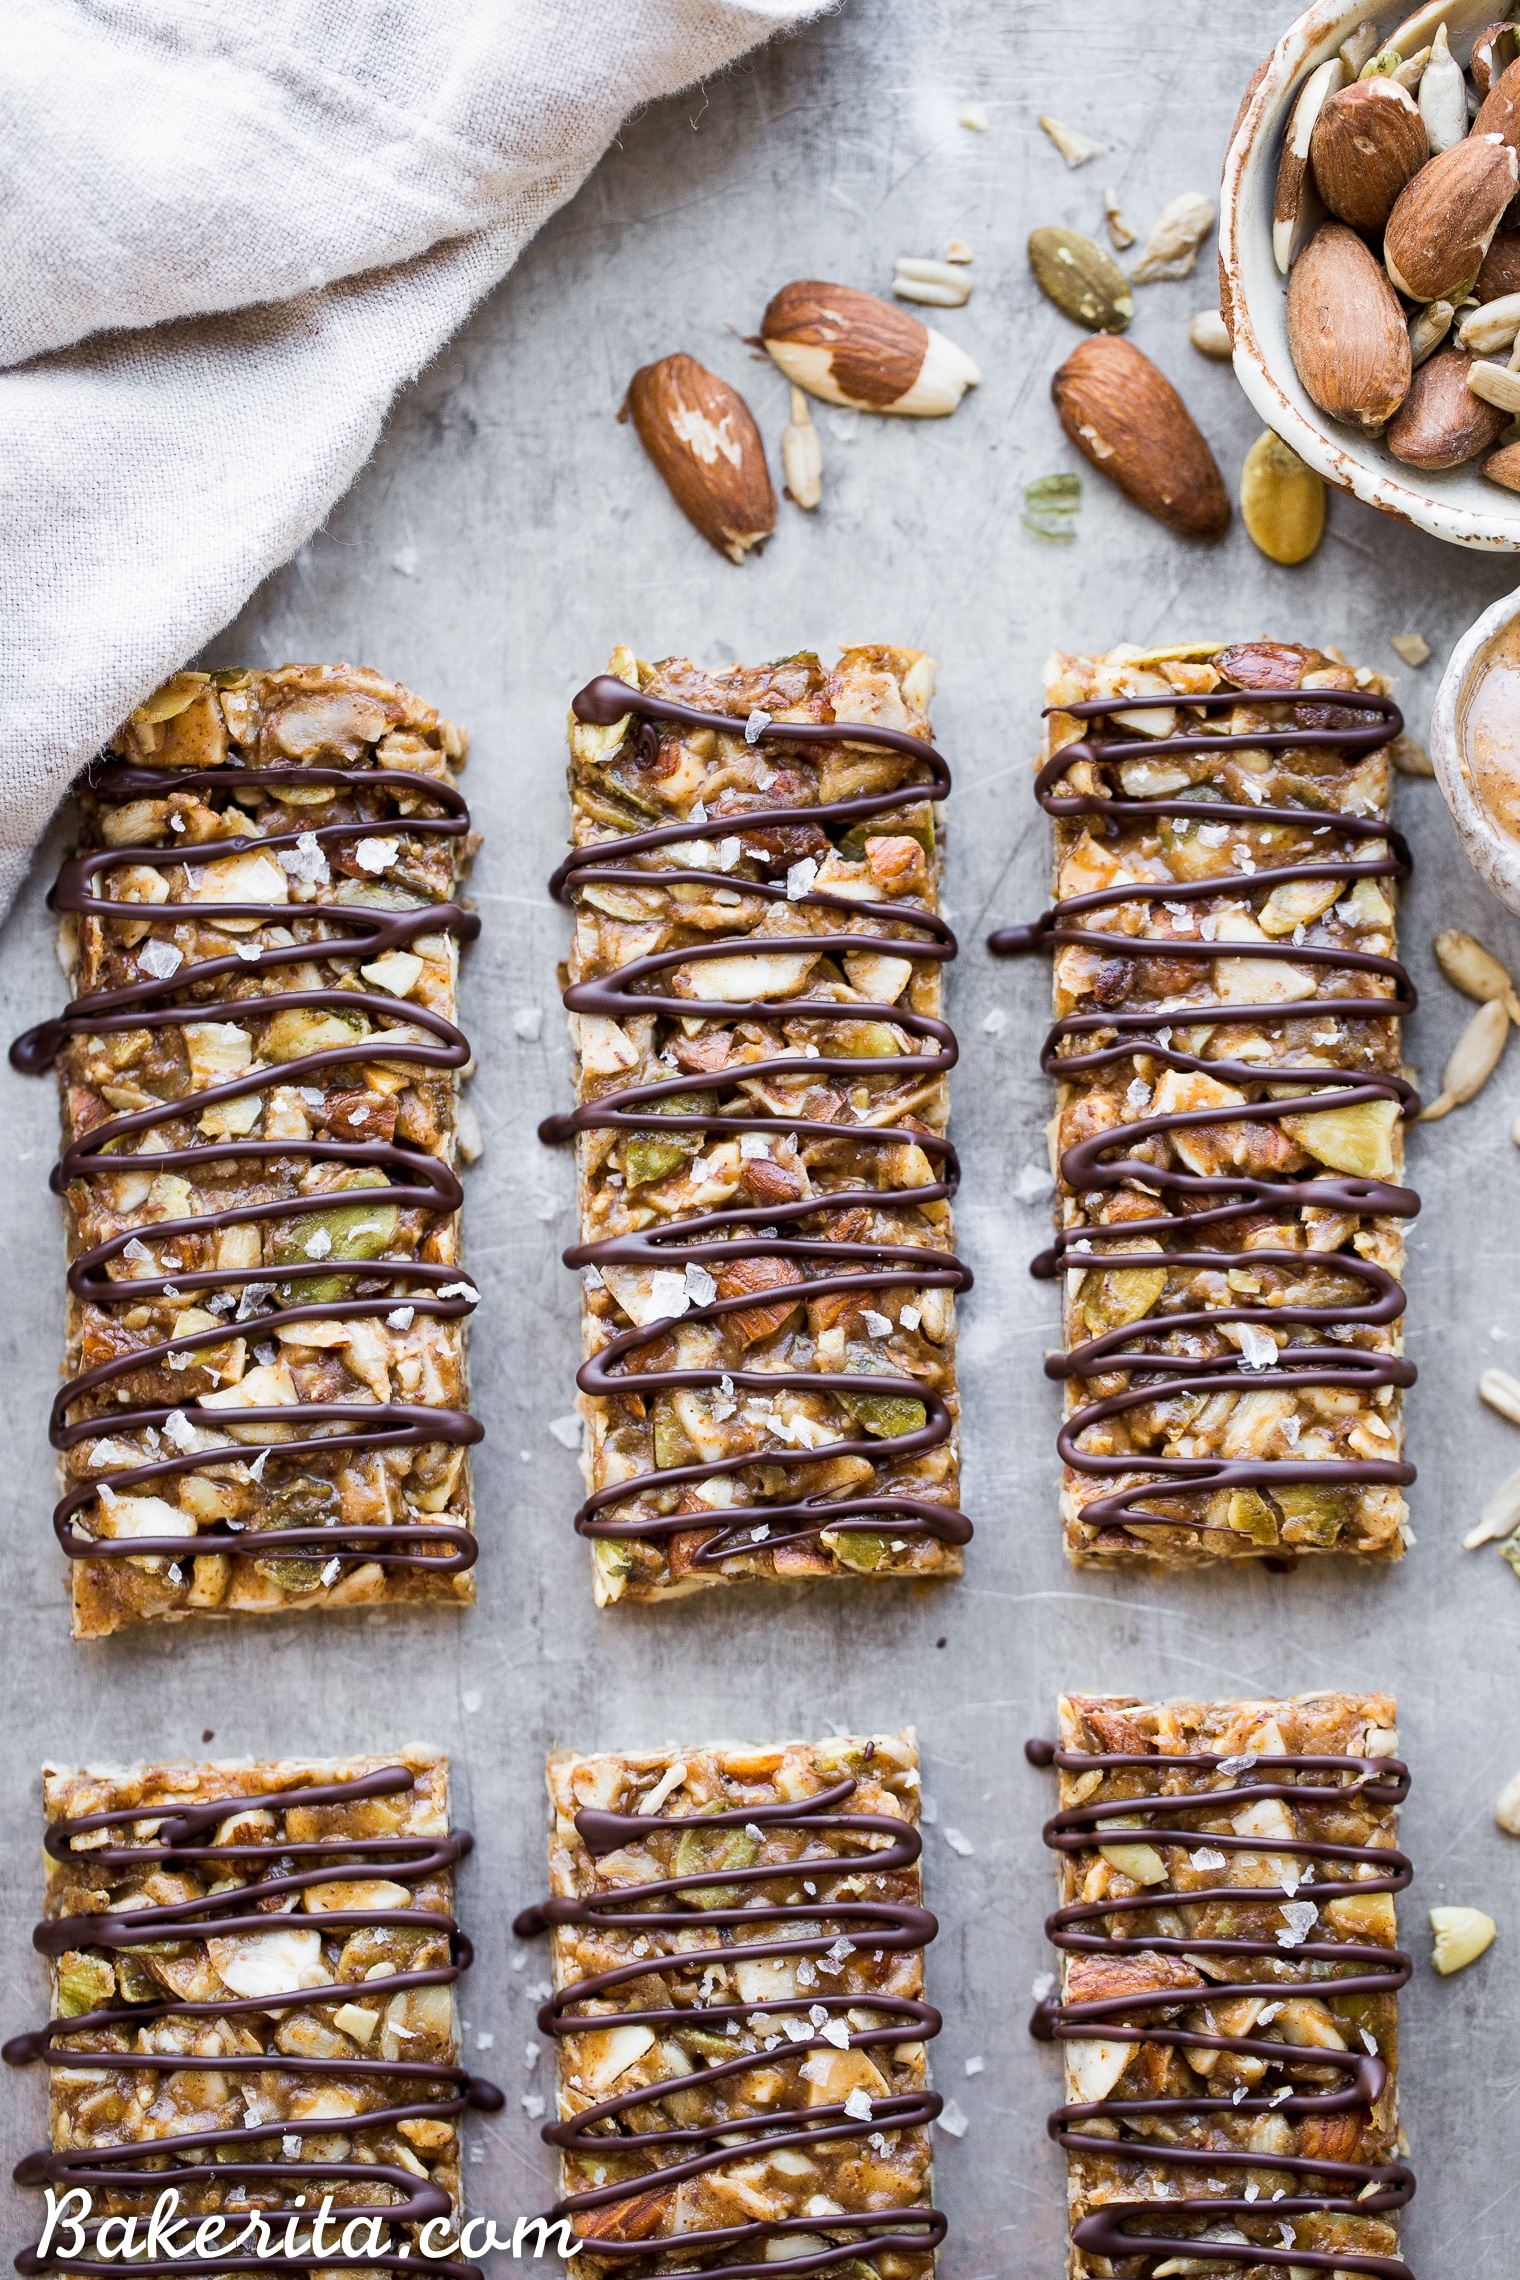 These No Bake Sprouted Nut & Seed Granola Bars are an easy and delicious granola bar that's way cleaner than most of what you can find at the grocery store! Best of all, you can customize them to suit your taste buds. You're going to love these gluten-free, paleo, and vegan granola bars!